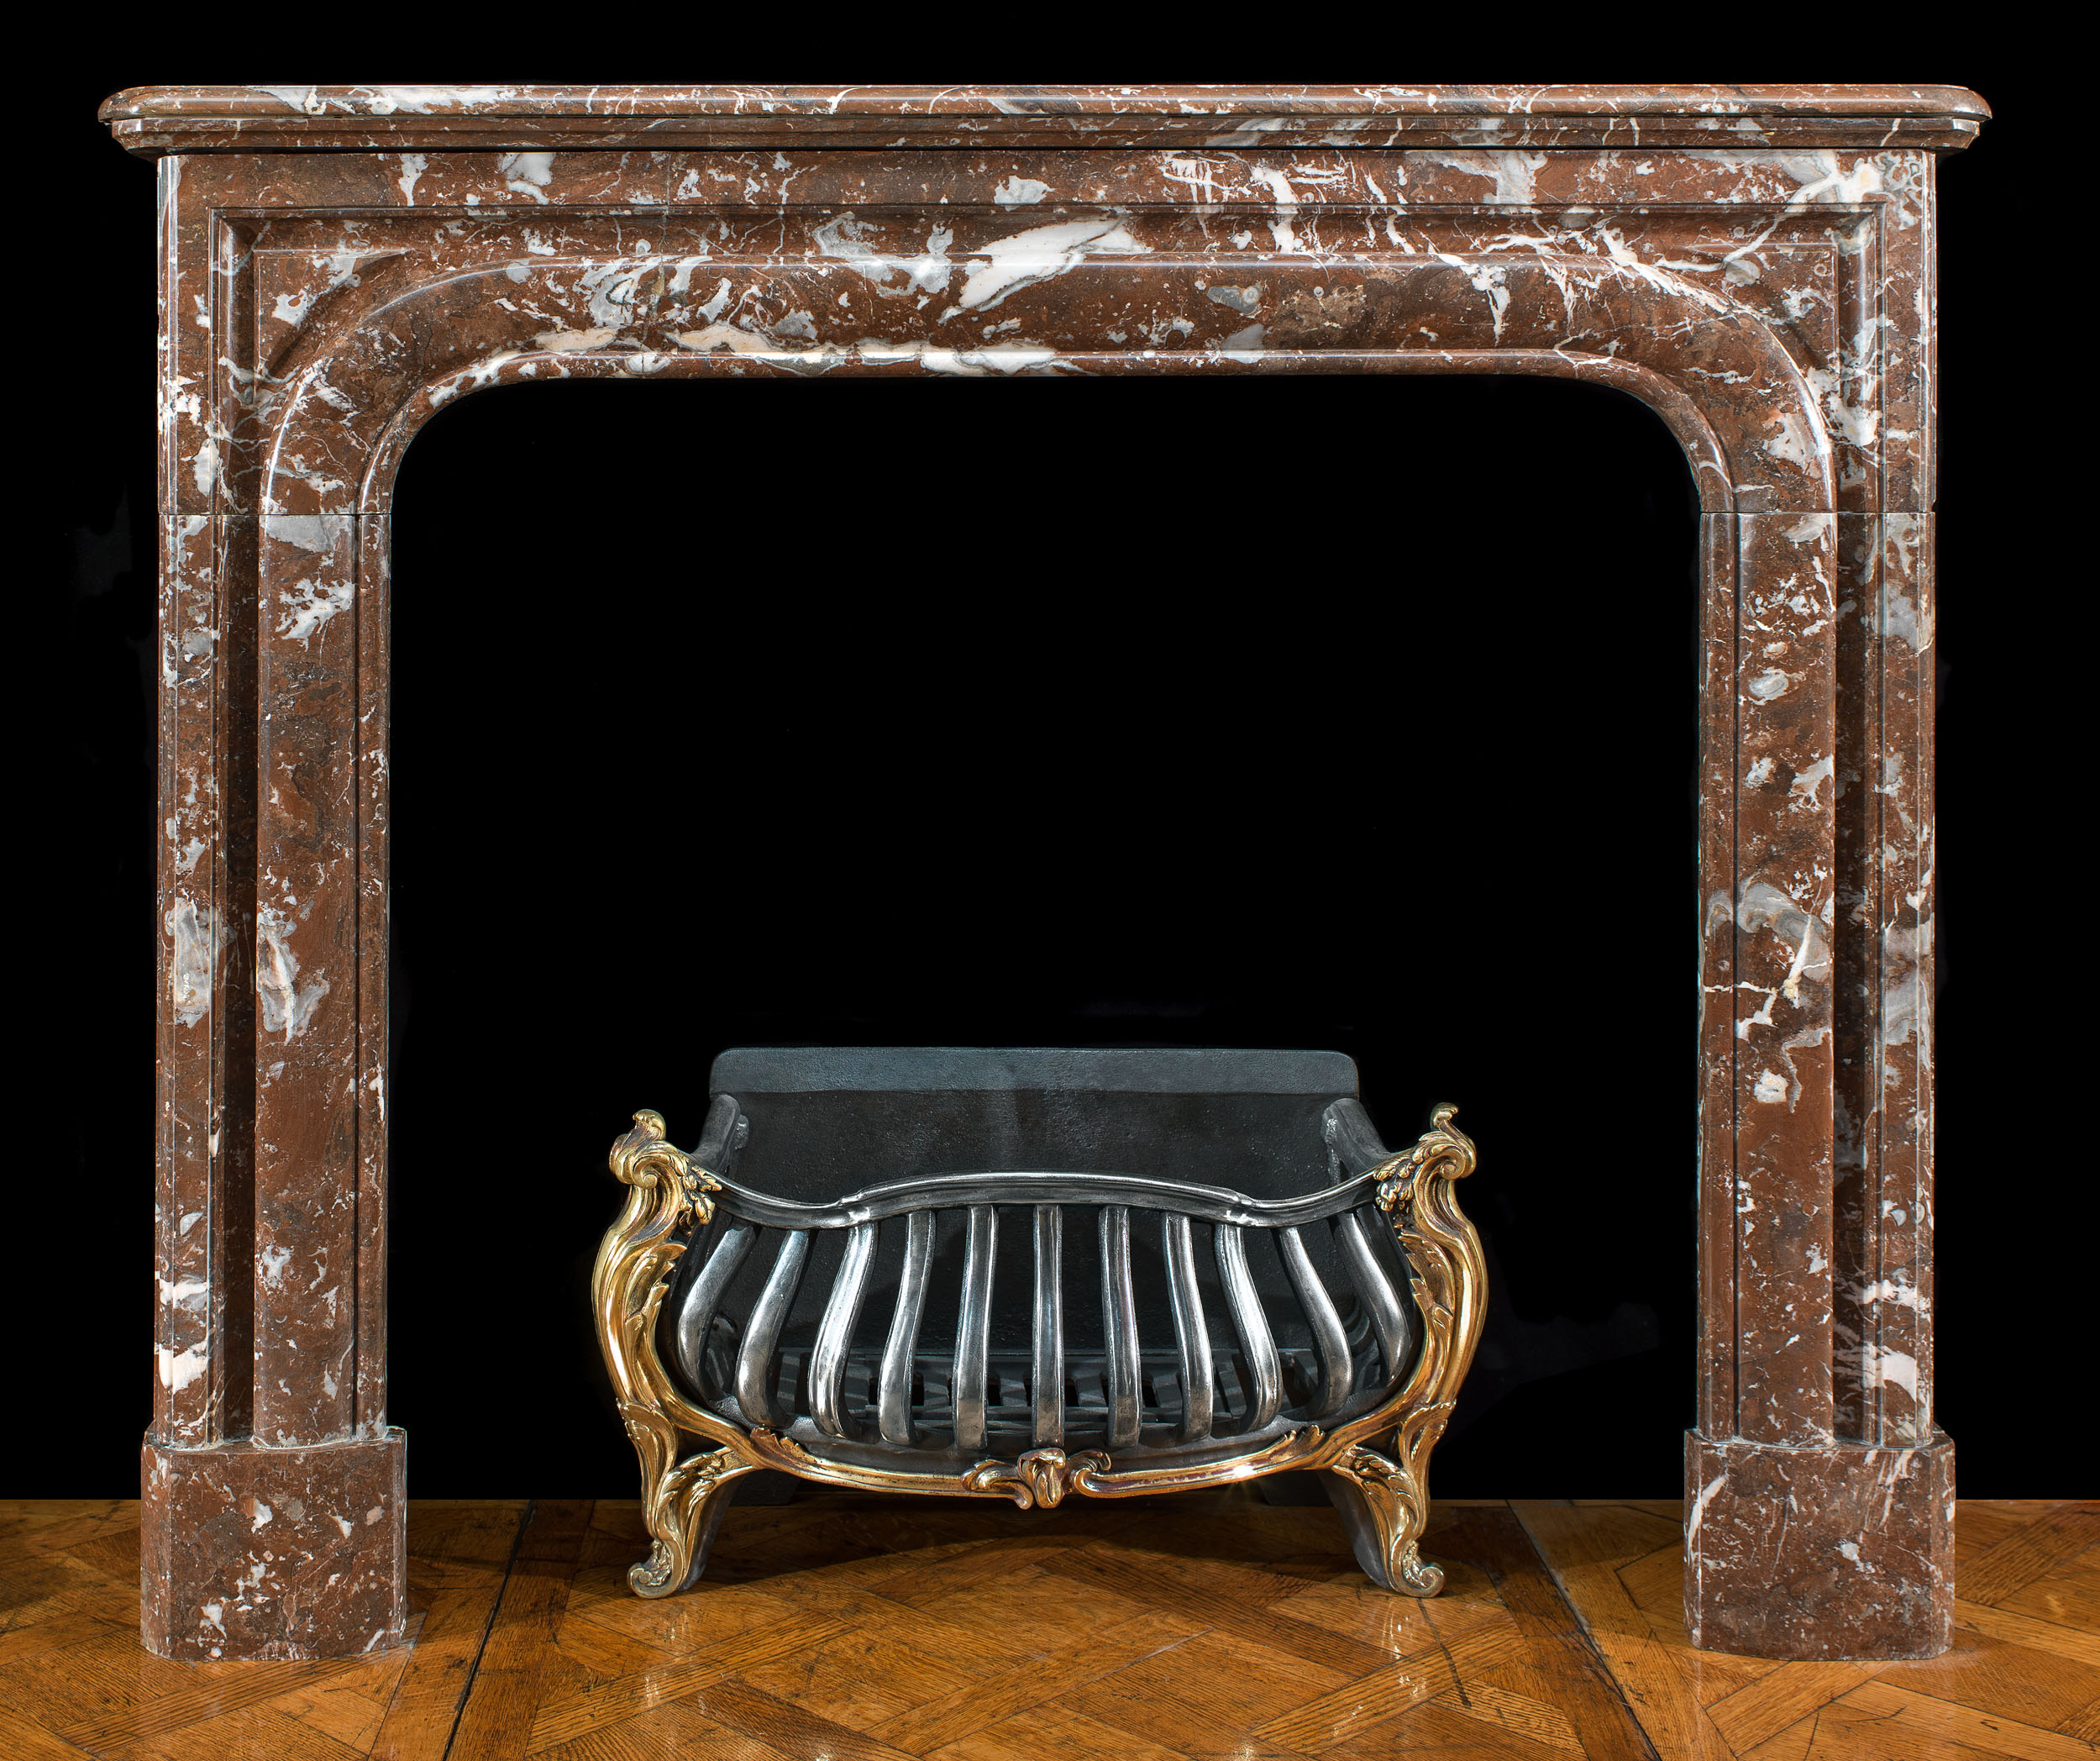 A Small Louis XIV Rouge Royale Fireplace